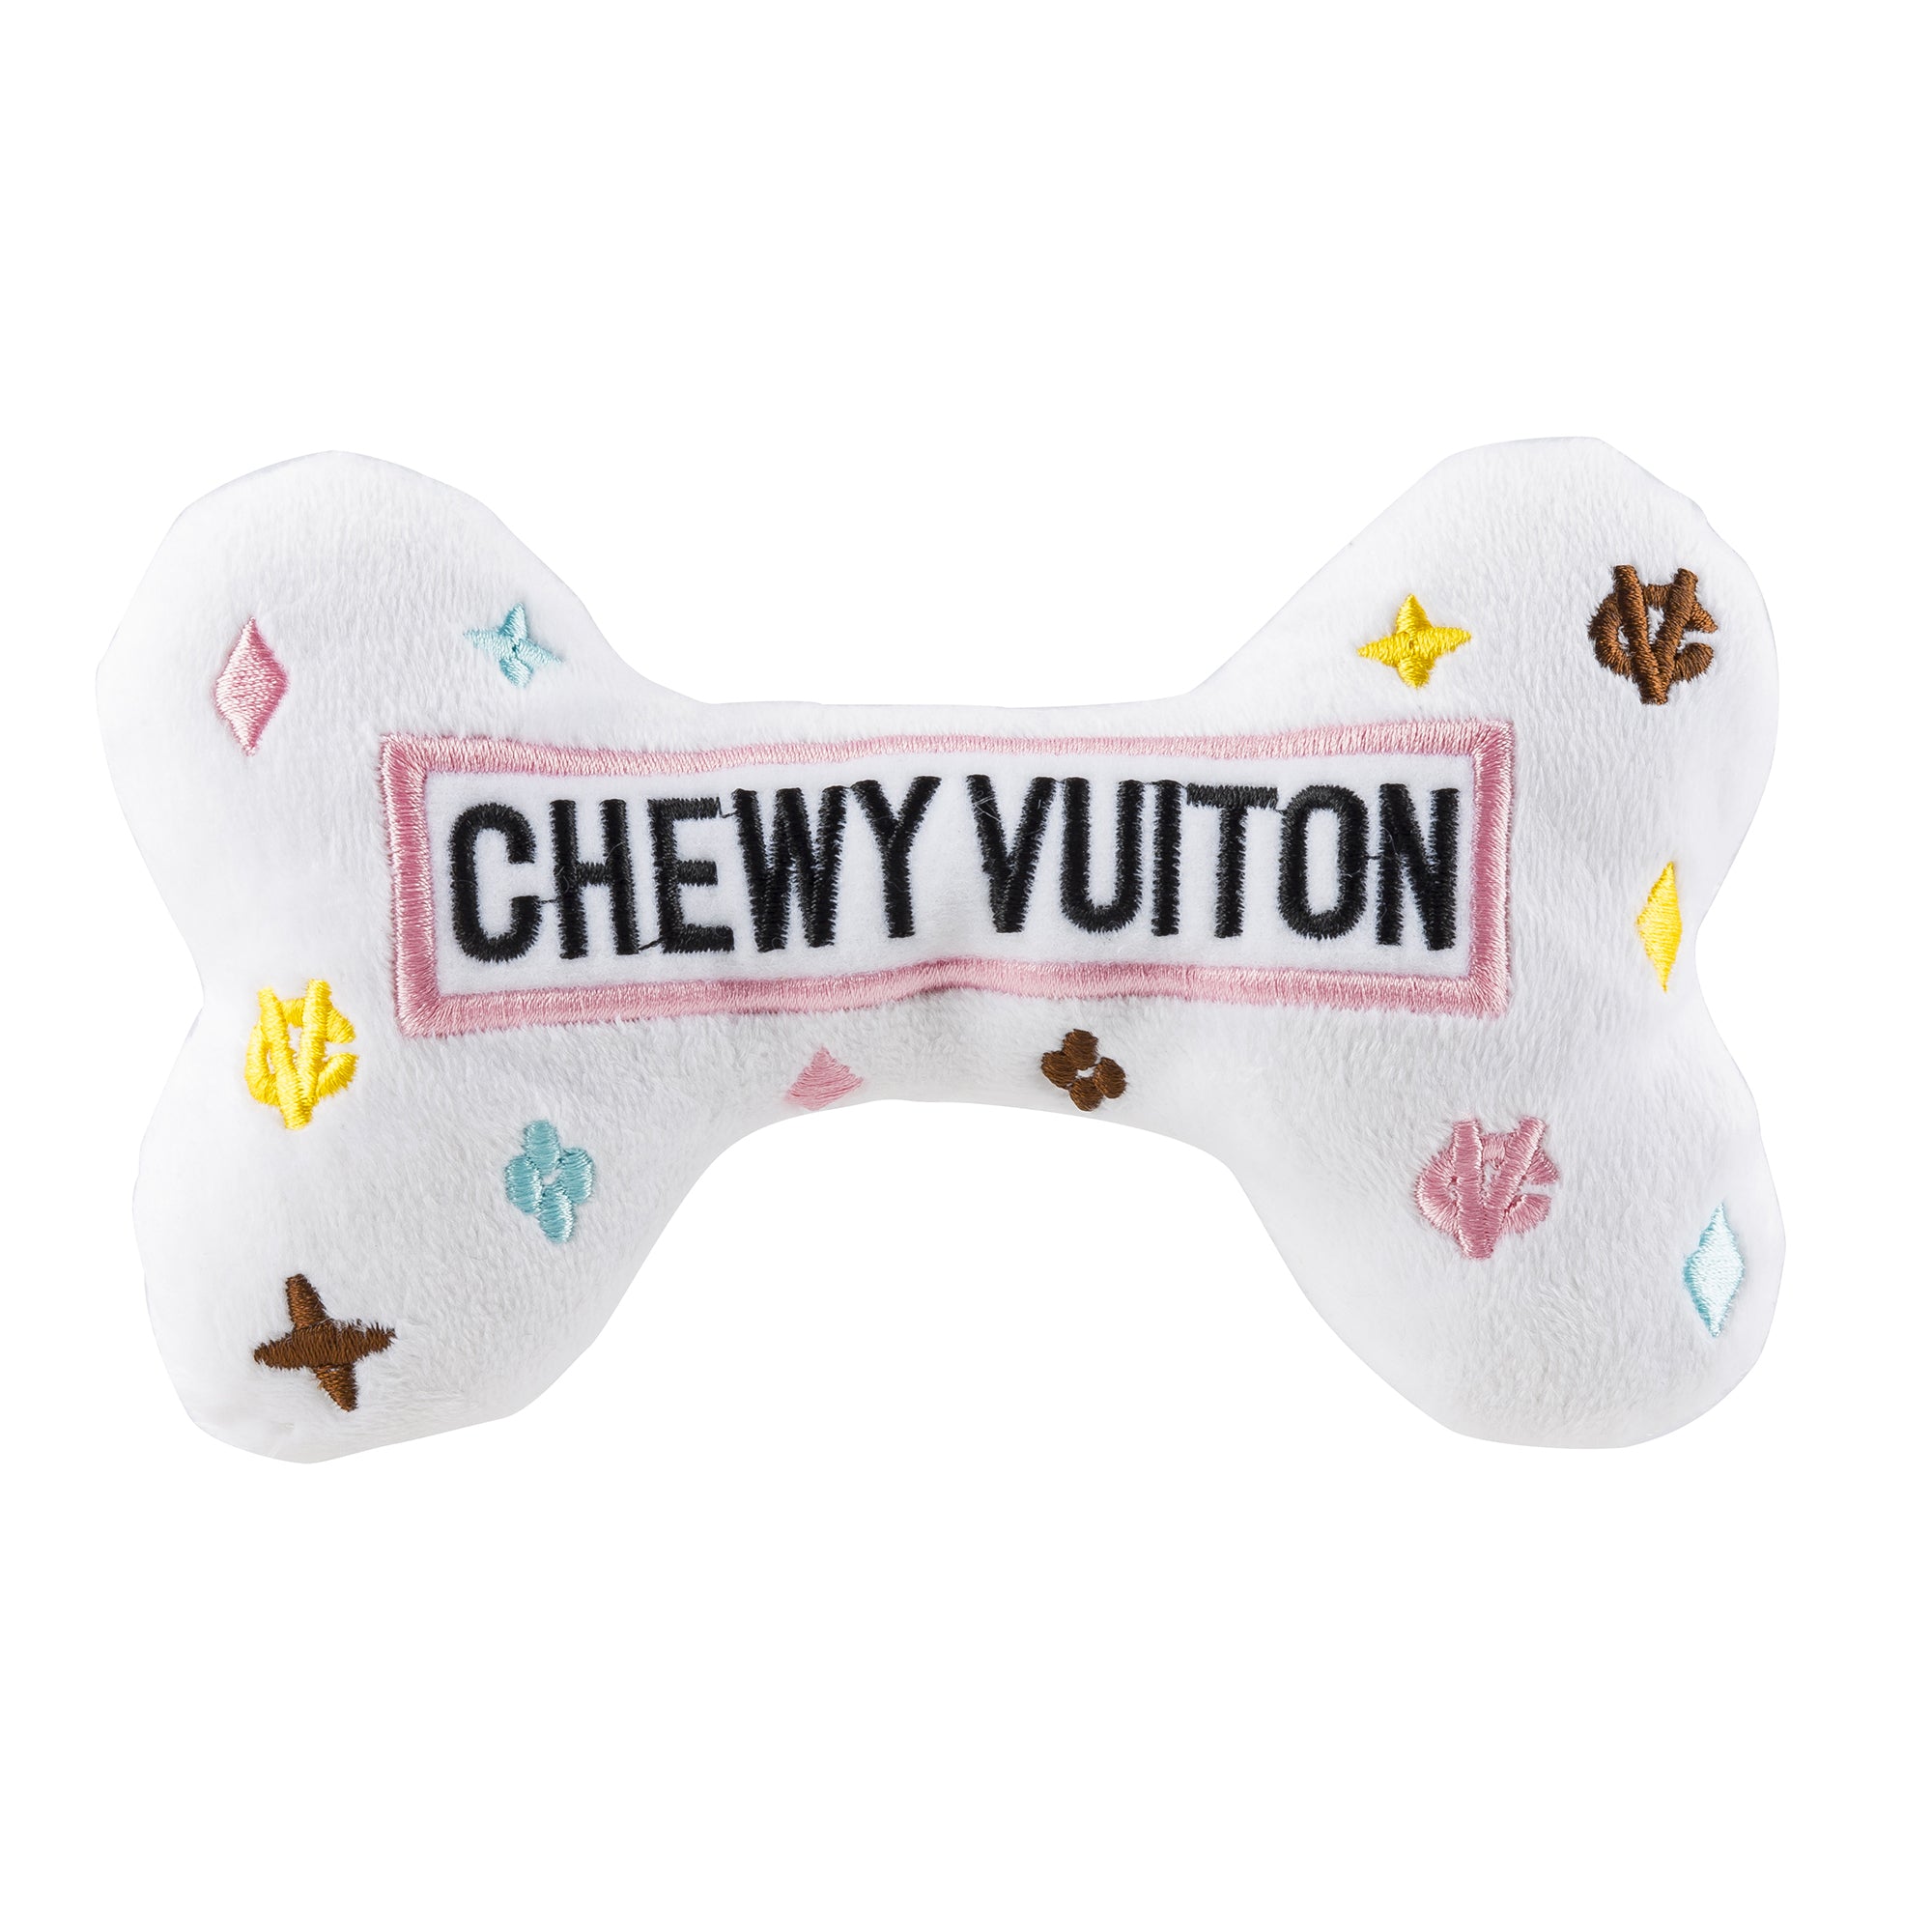 Chewy Vuiton White Bag Dog Toy – Coco & Pud